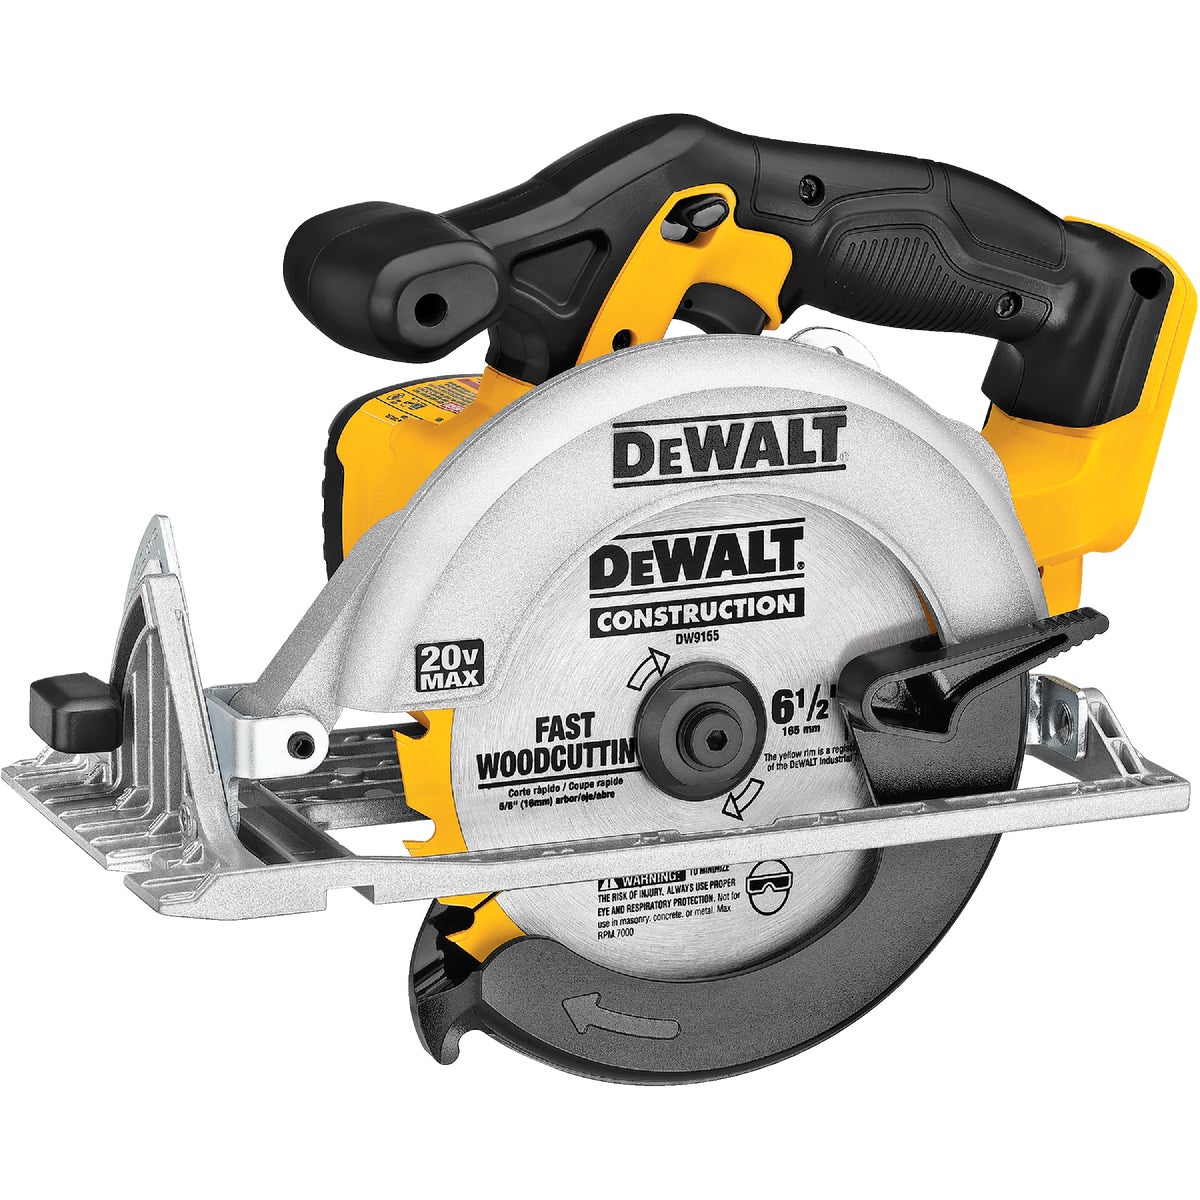 Item 300035, Make demanding cuts with ease using the 20V MAX 6-1/2 in. Circular Saw.